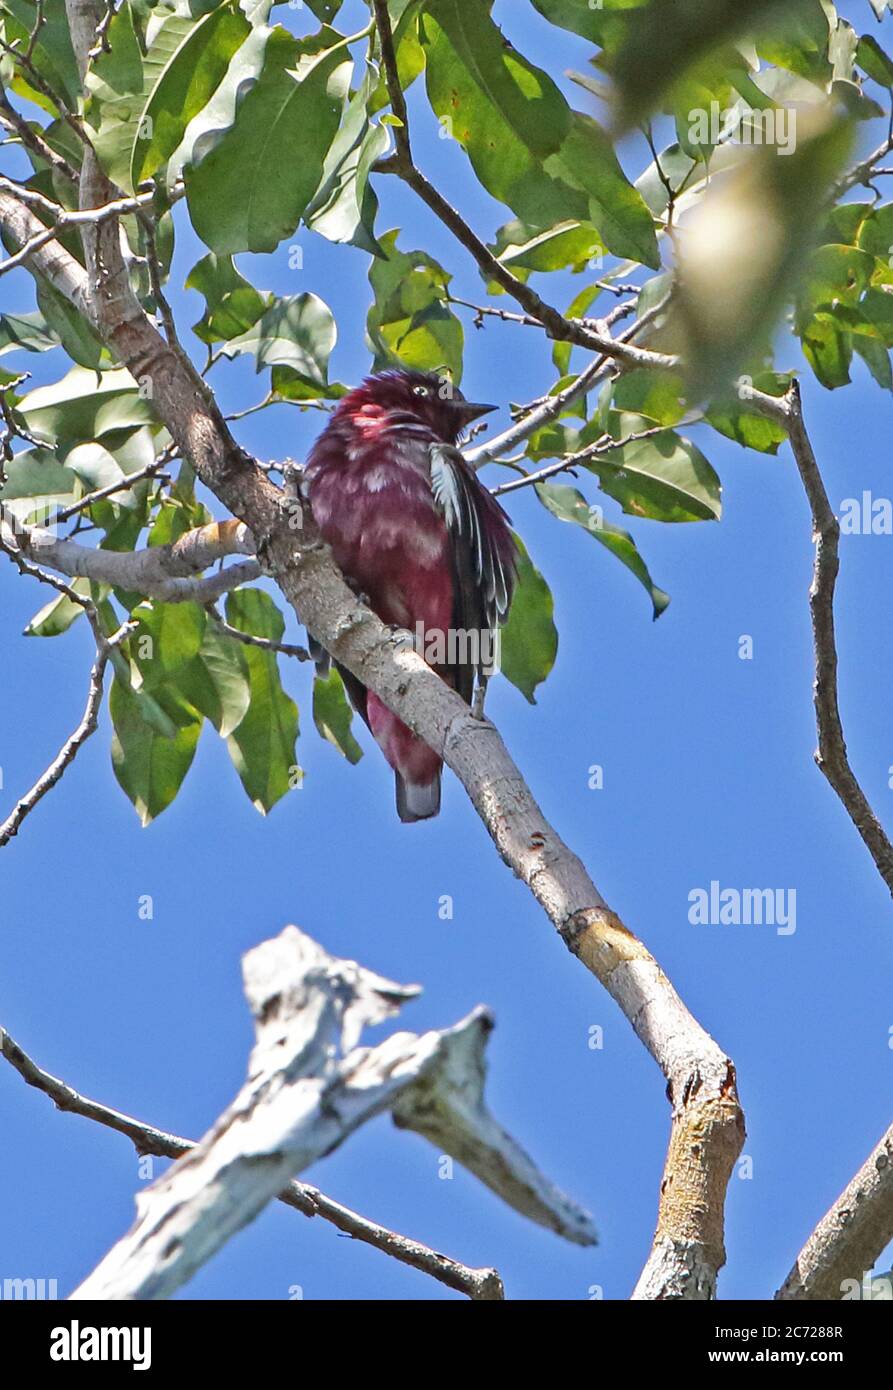 Pompadour Cotinga (Xipholena punicea) adult male perched on branch  Cano Carbon, Inirida, Columbia         November Banque D'Images